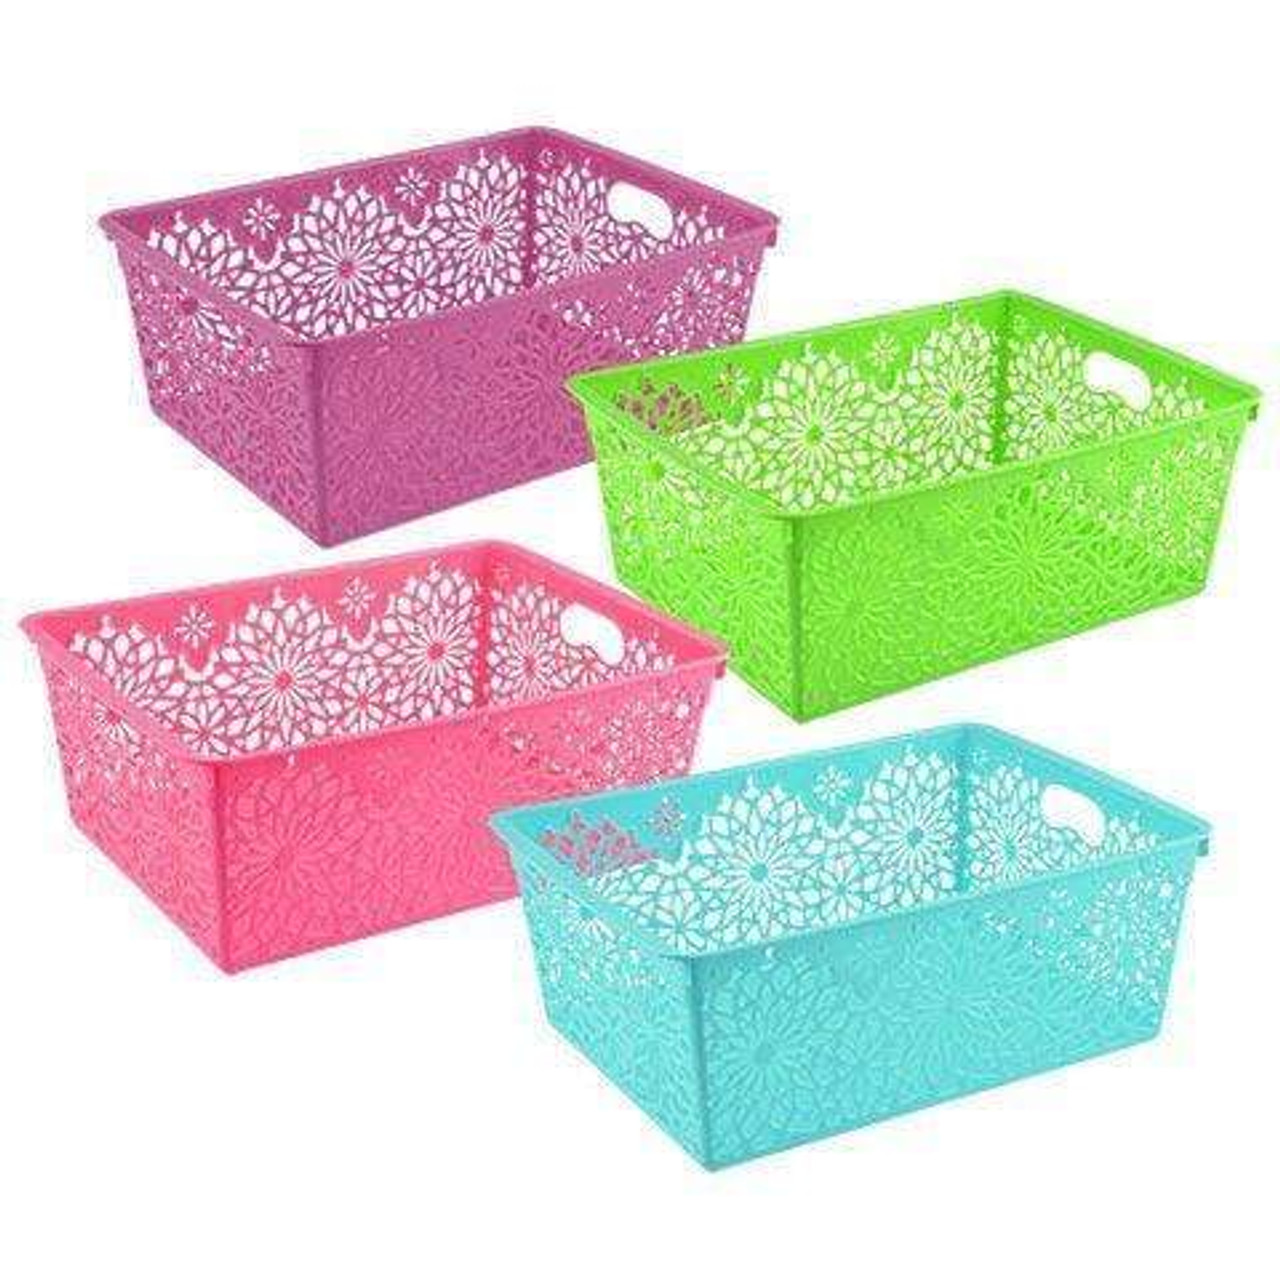 https://cdn11.bigcommerce.com/s-yvpirc28f4/images/stencil/1280x1280/products/60900/149903/large-rectangular-decorative-slotted-plastic-storage-baskets-snatcher-online-shopping-south-africa-28780853690527__23054.1629466231.jpg?c=1&imbypass=on